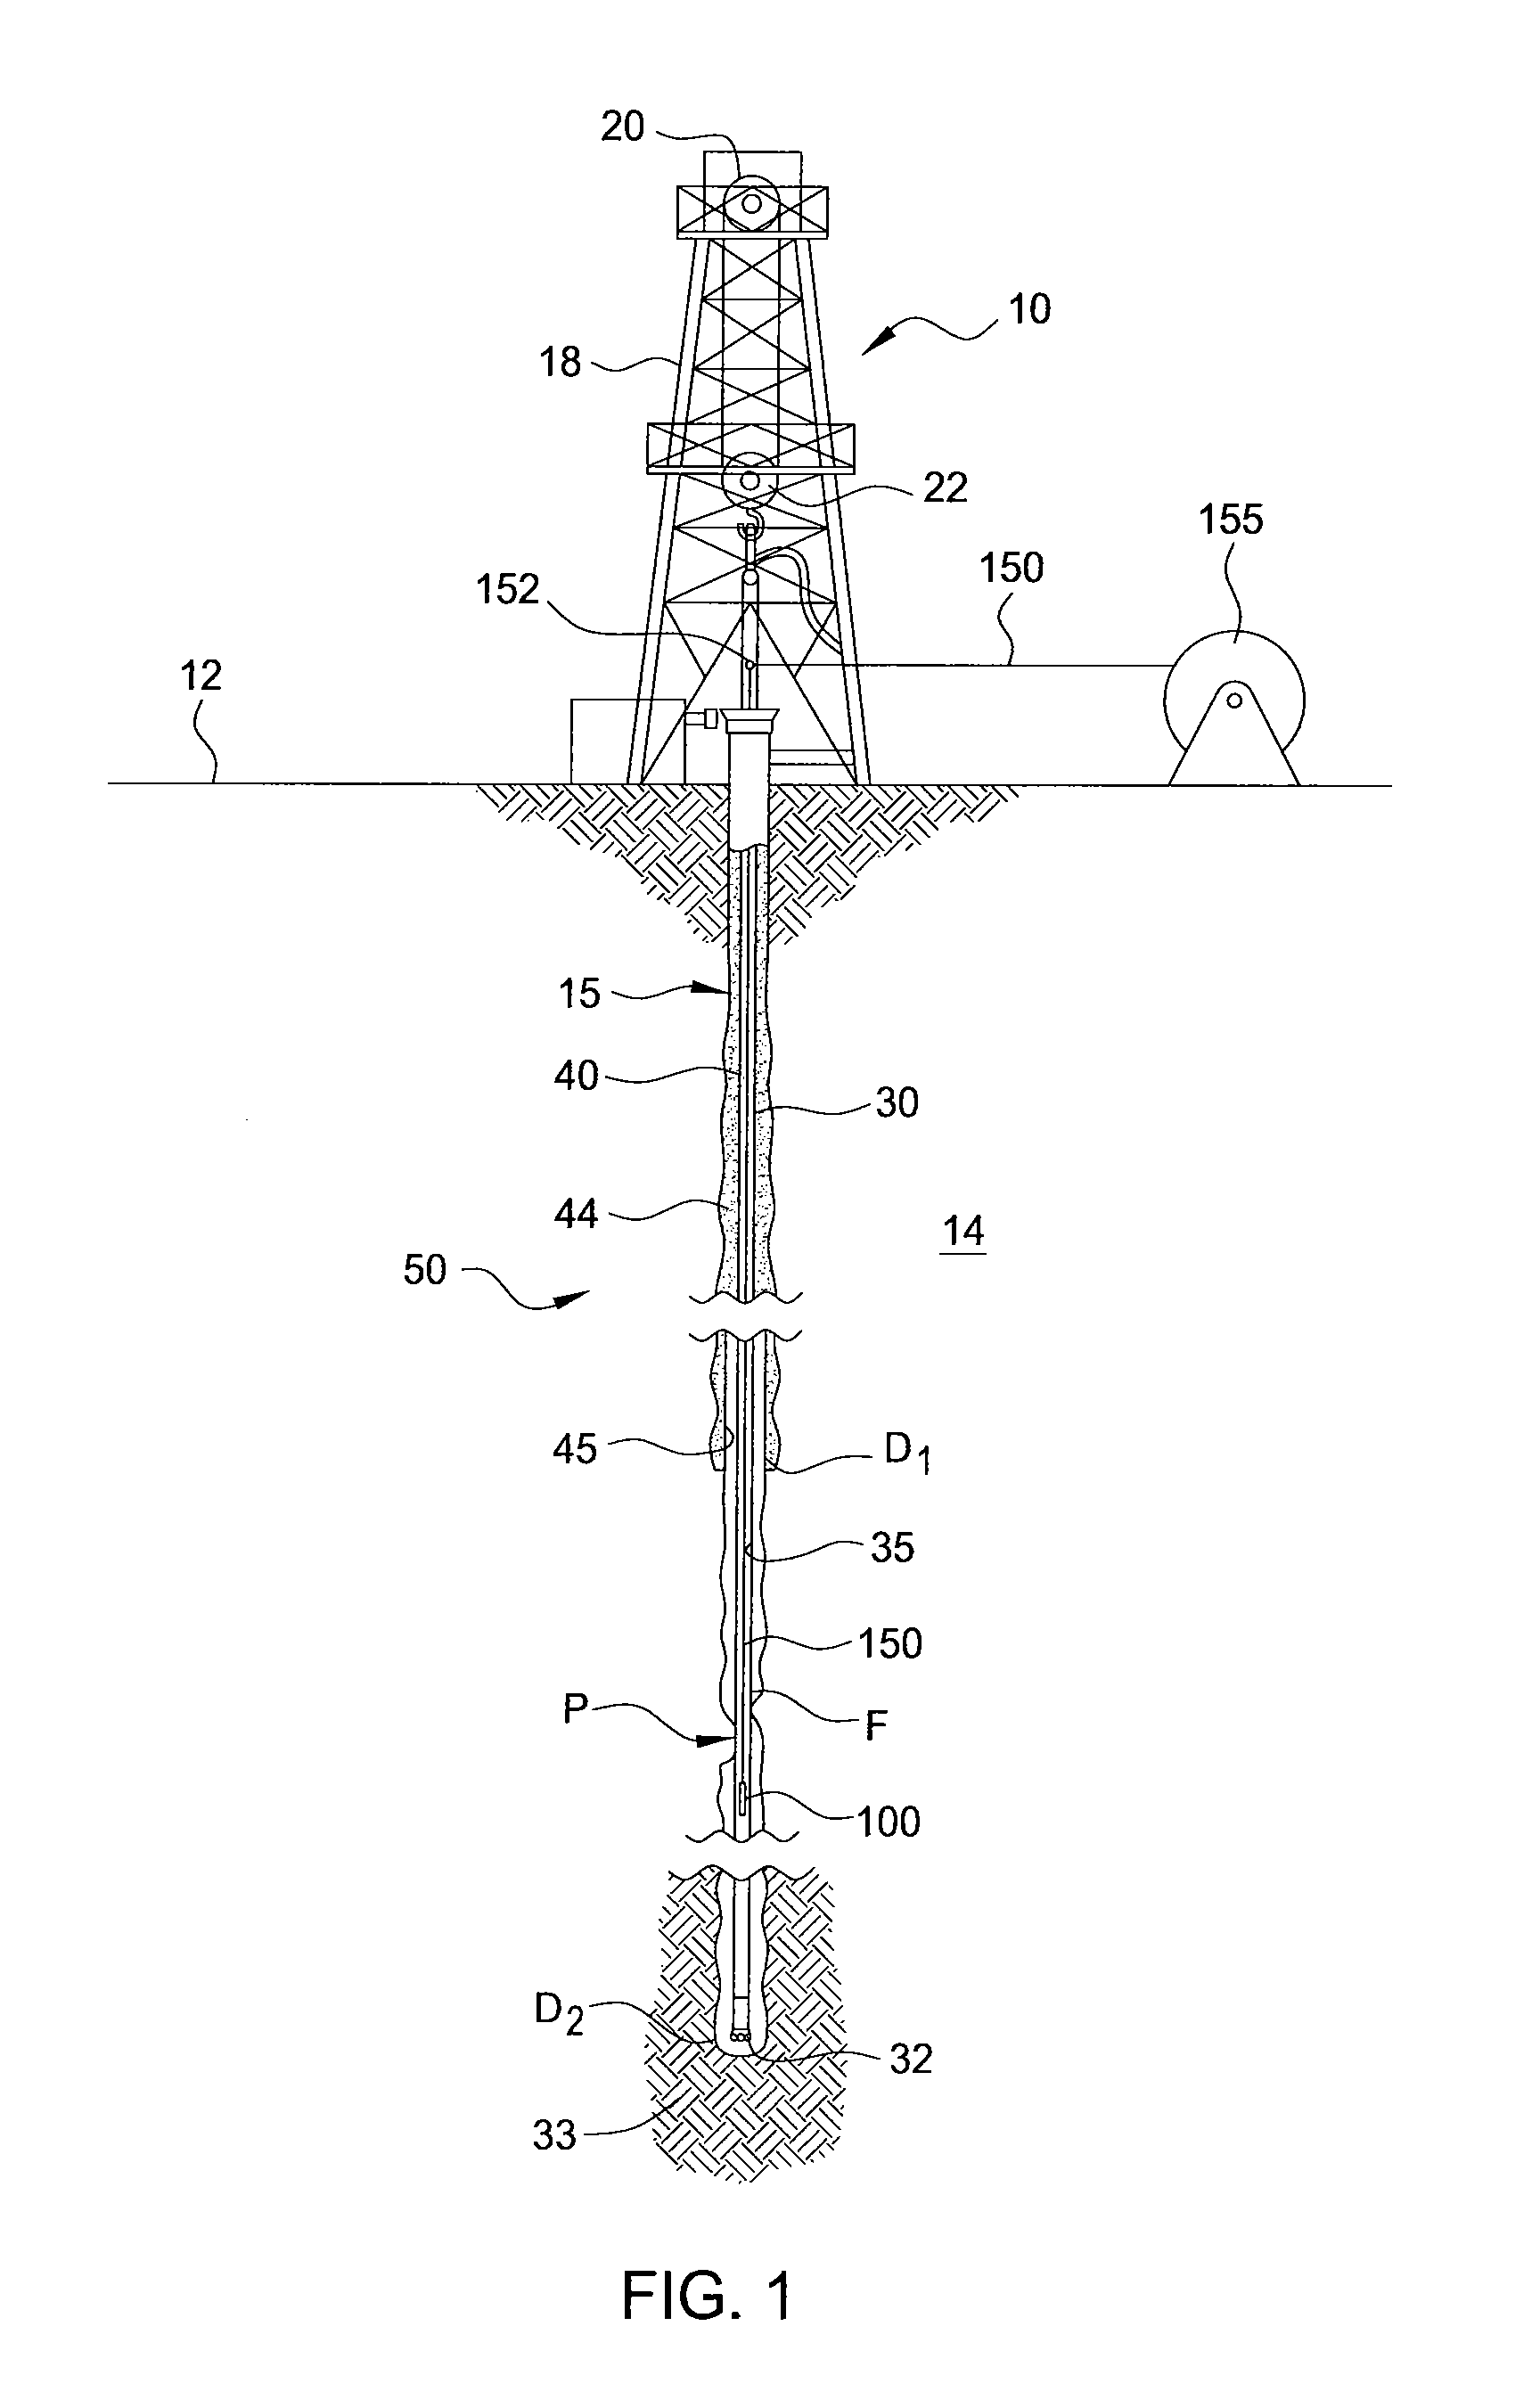 Interface for deploying wireline tools with non-electric string